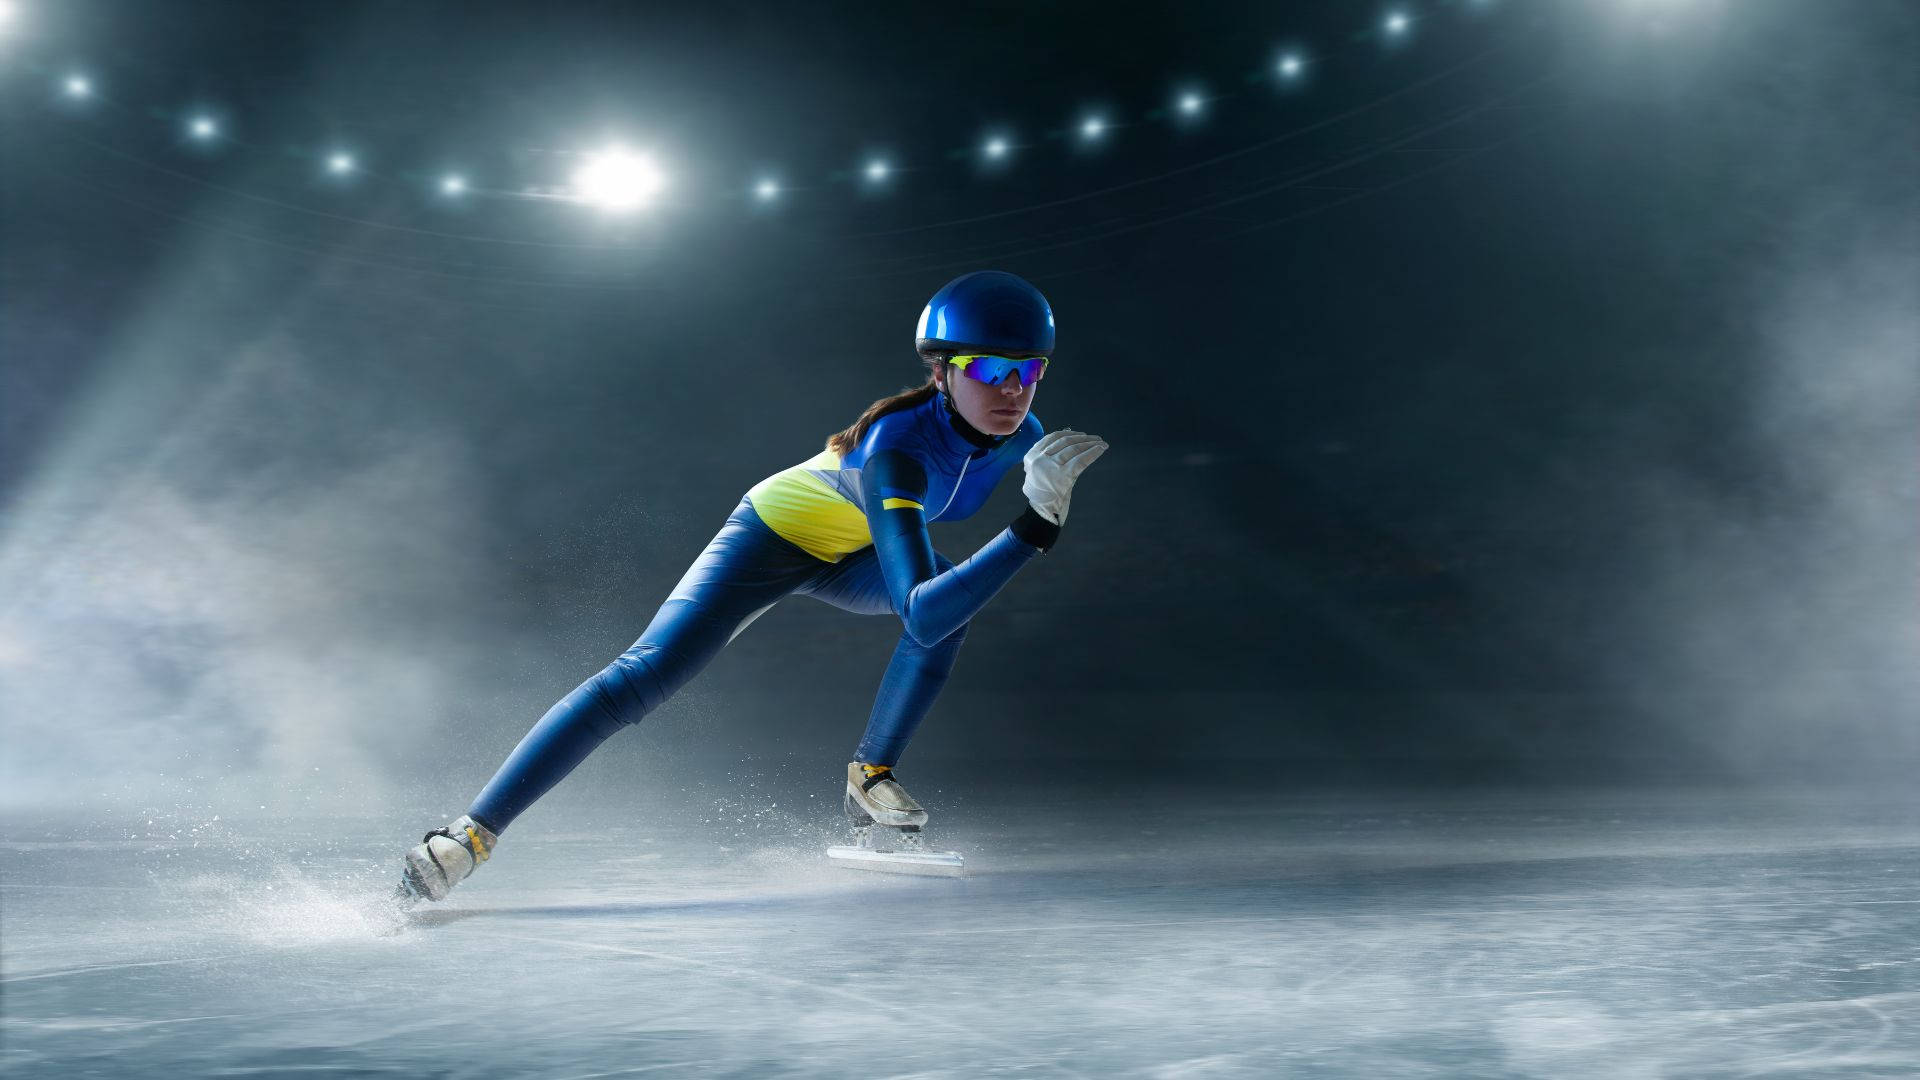 Intense Moment Of Excellence In The Speed Skating Competition Wallpaper